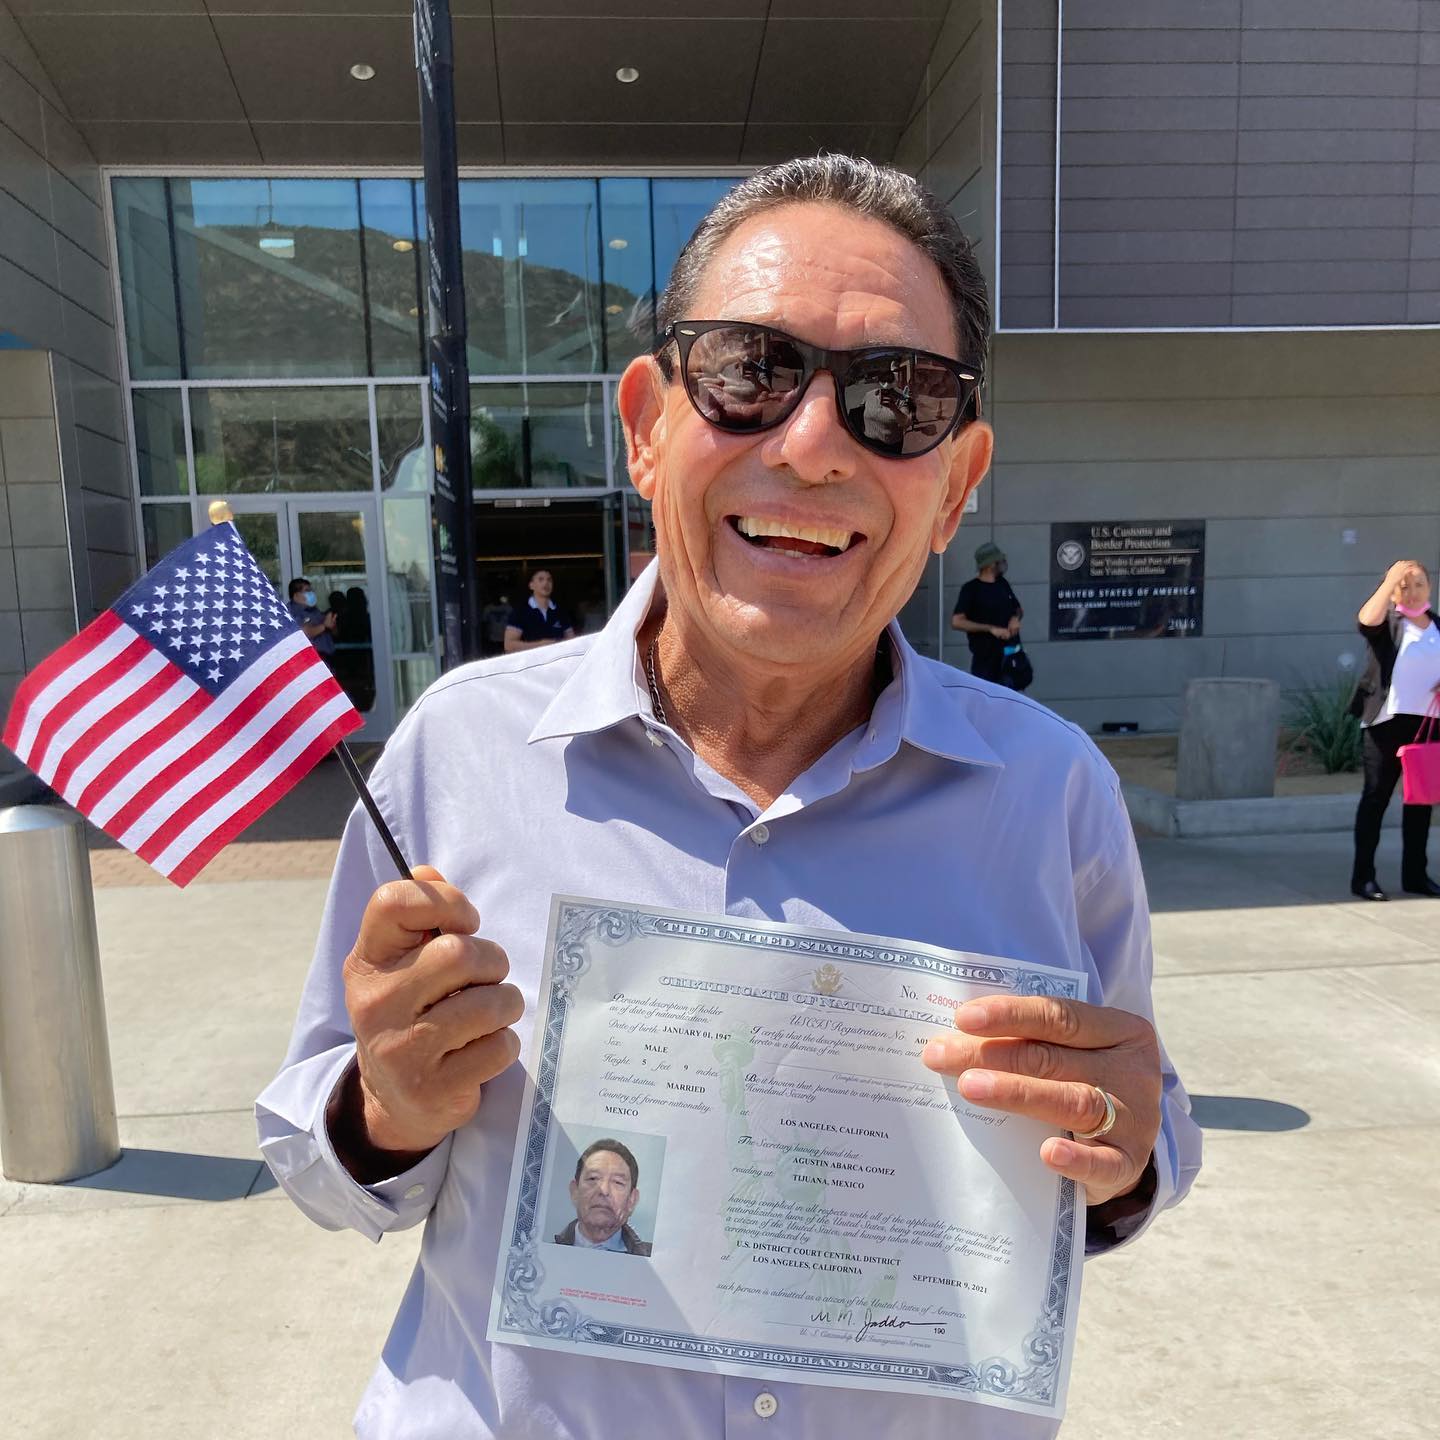 Thirty Years After He Was First Deported, a . Veteran is Finally Sworn  in as a . Citizen - Public Counsel